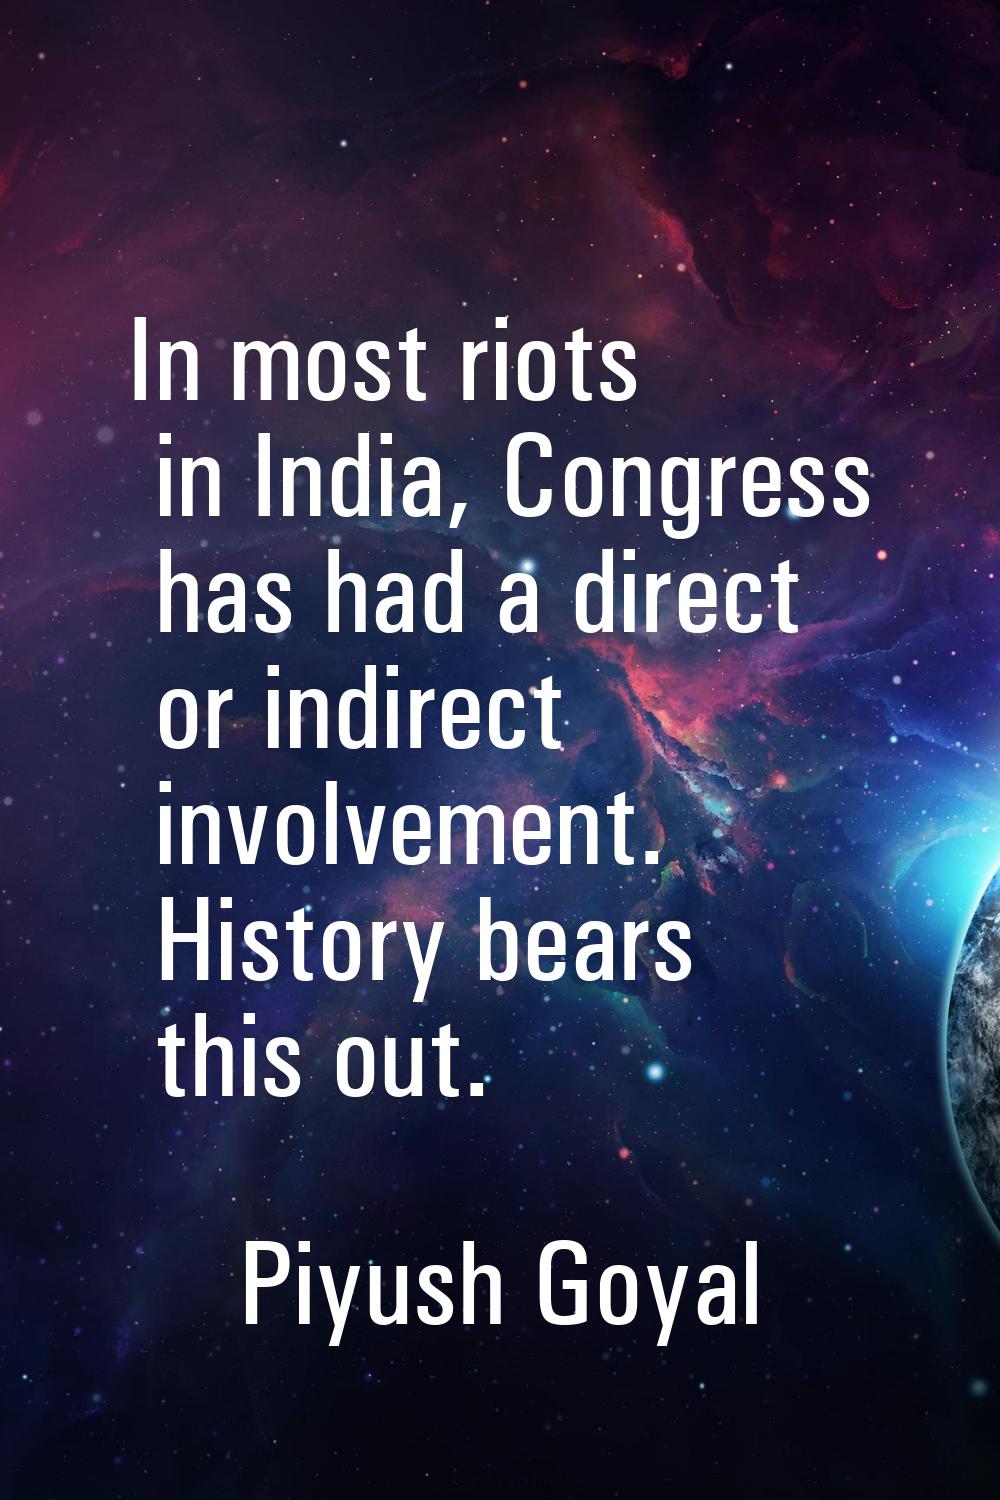 In most riots in India, Congress has had a direct or indirect involvement. History bears this out.